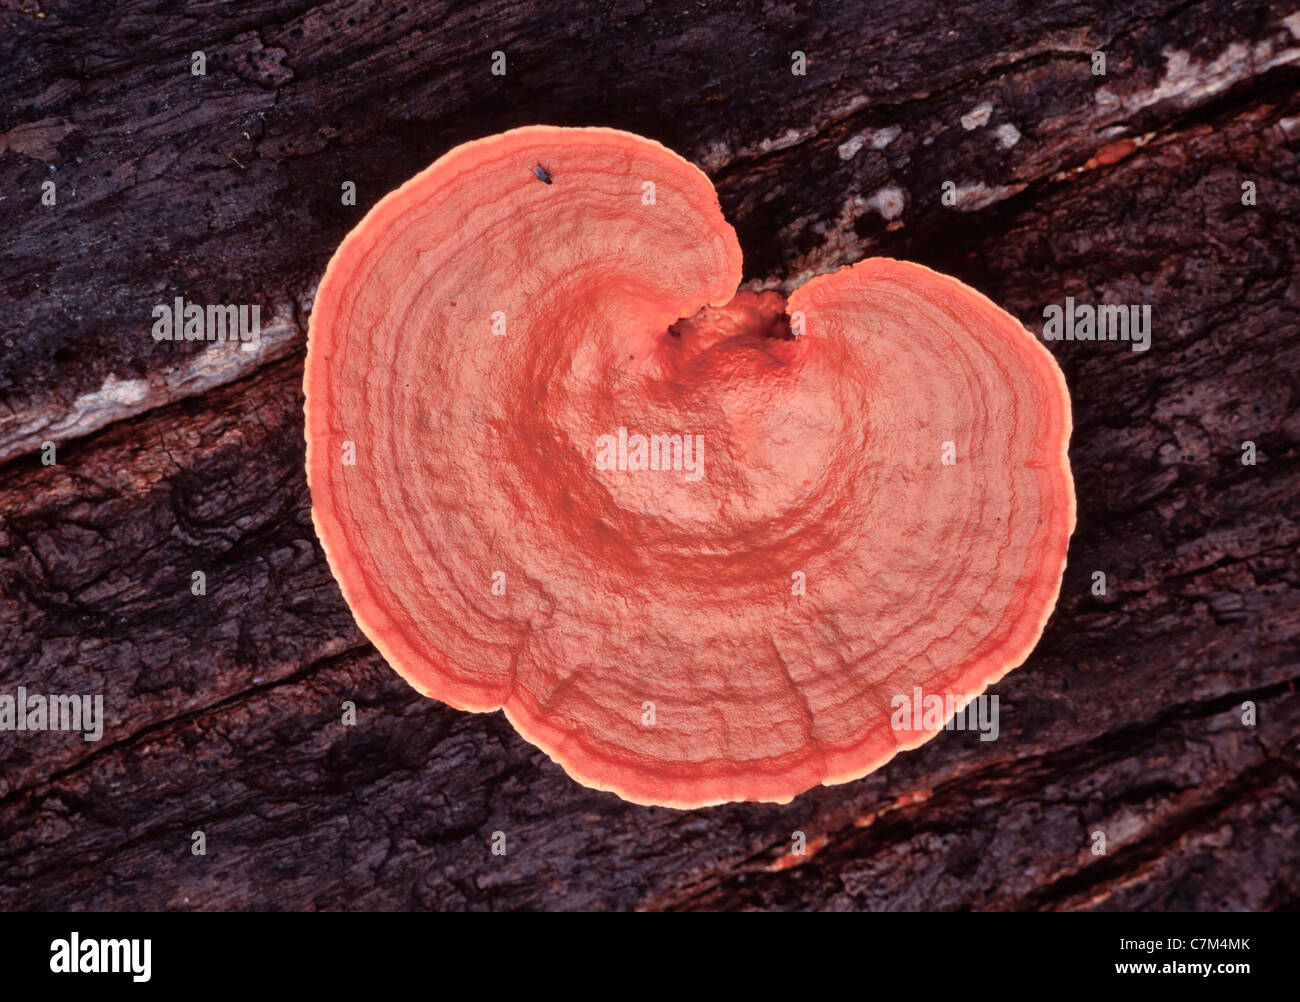 Tropical fungi growing on the forest floor, Mulu National Park, Sarawak, Borneo, East Malaysia Stock Photo